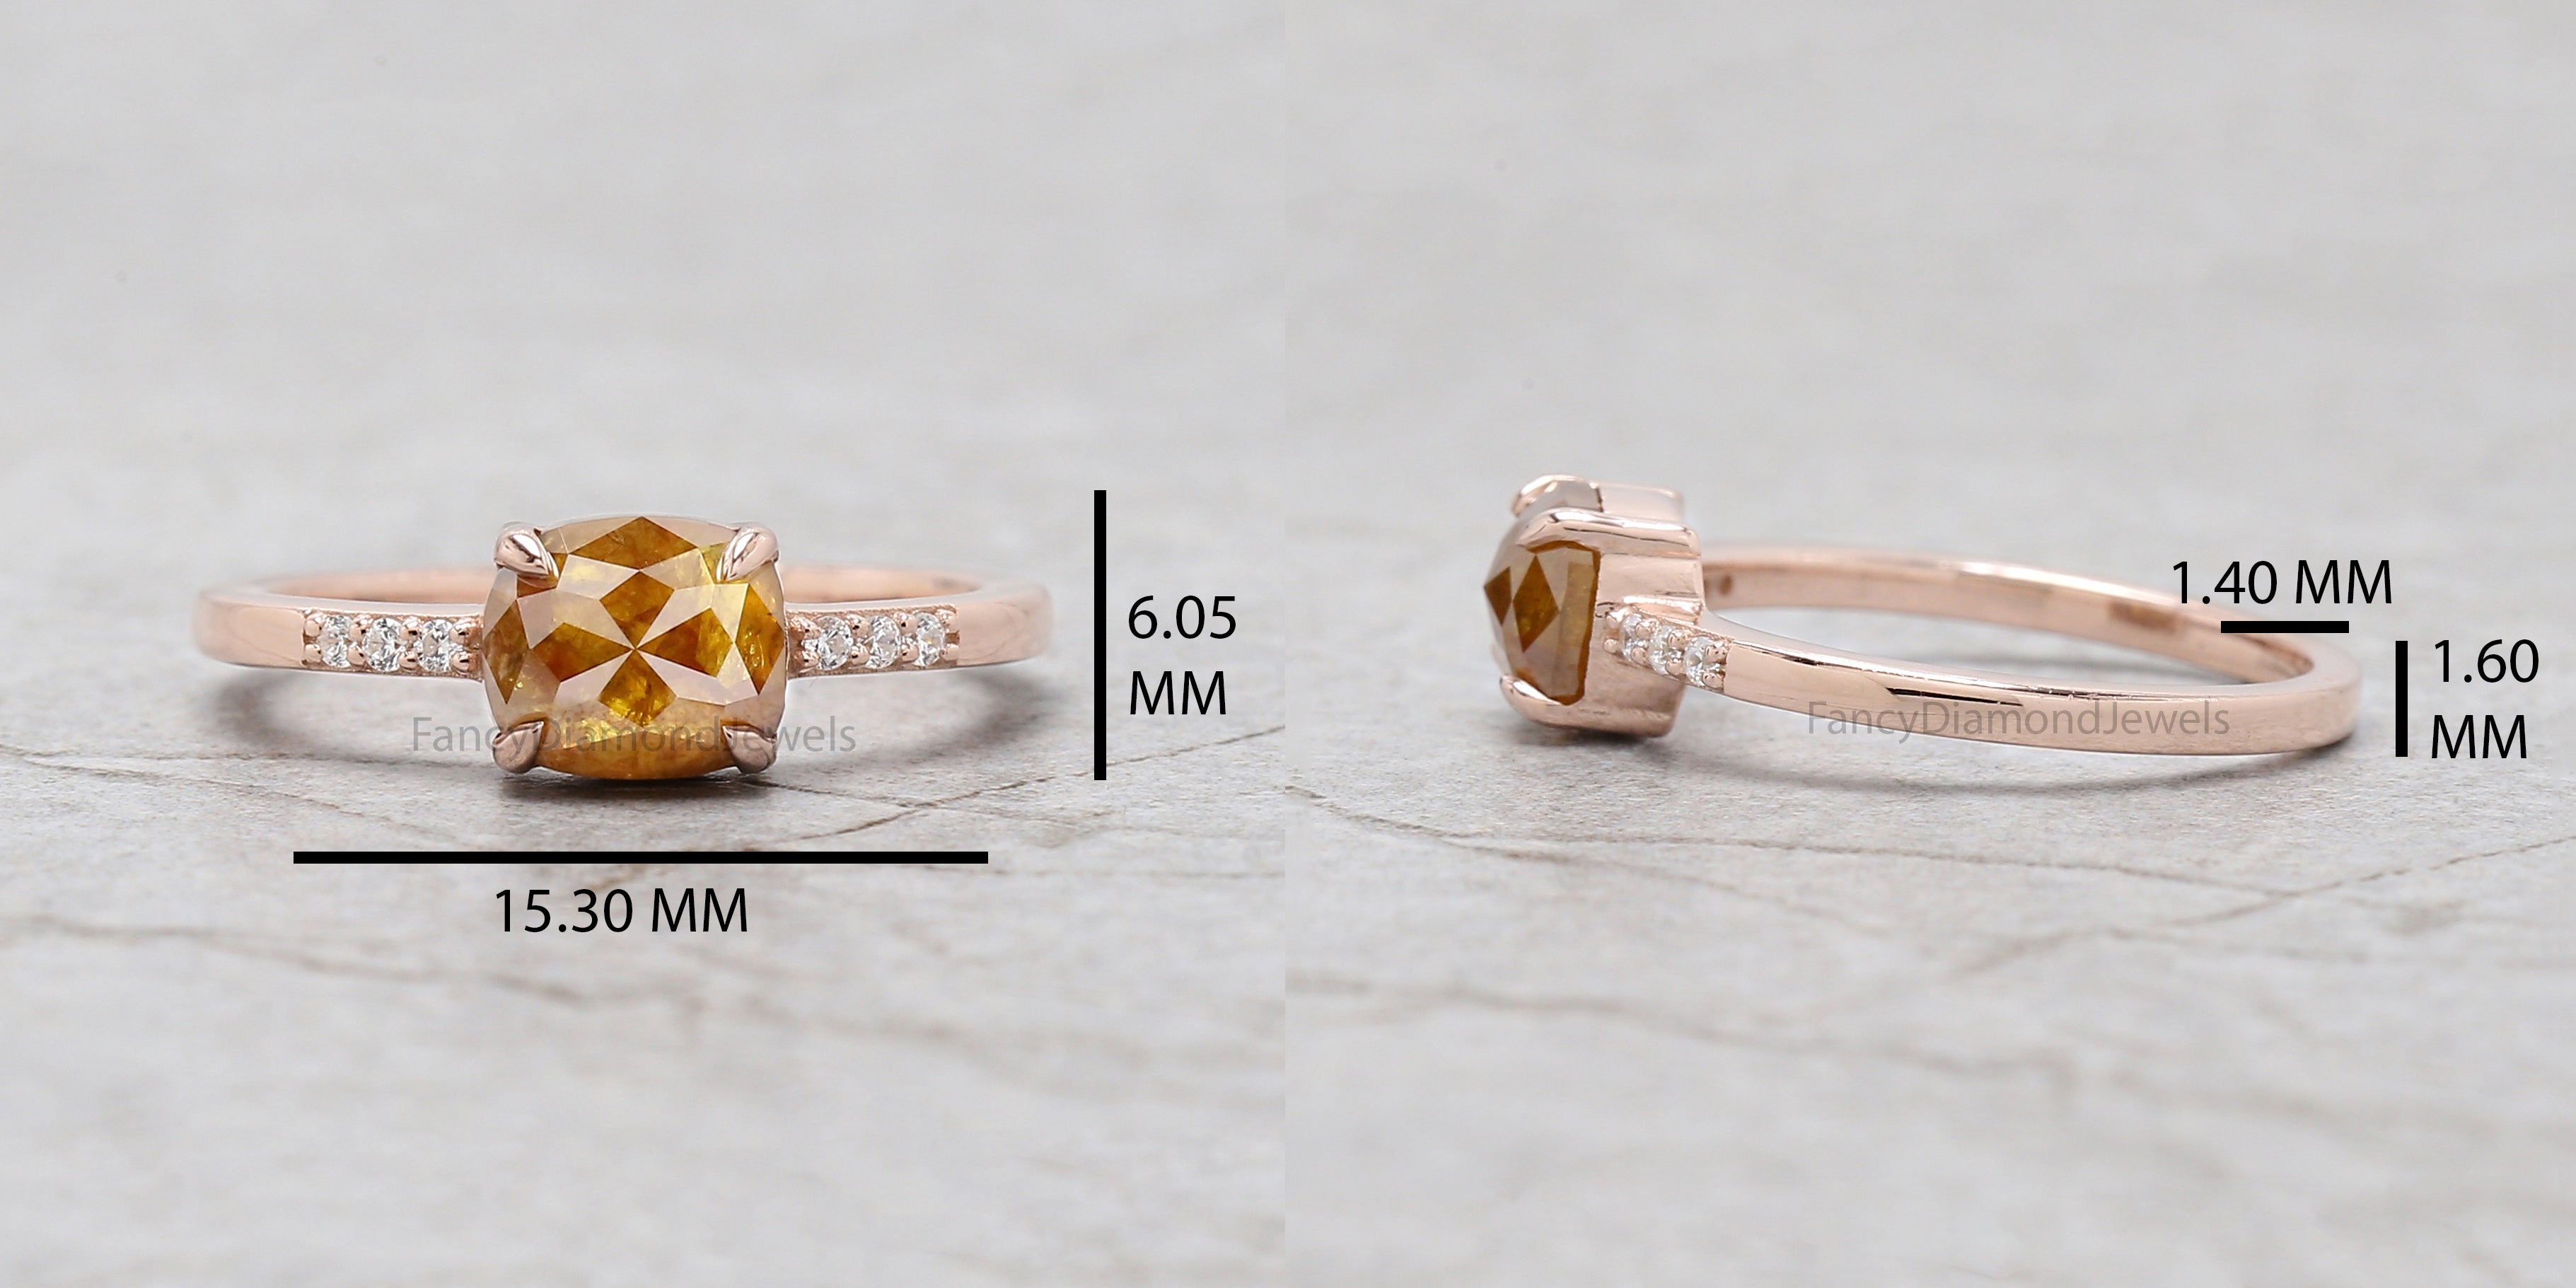 Cushion Yellow Color Diamond Ring 1.39 Ct 6.92 MM Brown Cushion Diamond Ring 14K Solid Rose Gold Silver Engagement Ring Gift For Her QL2885